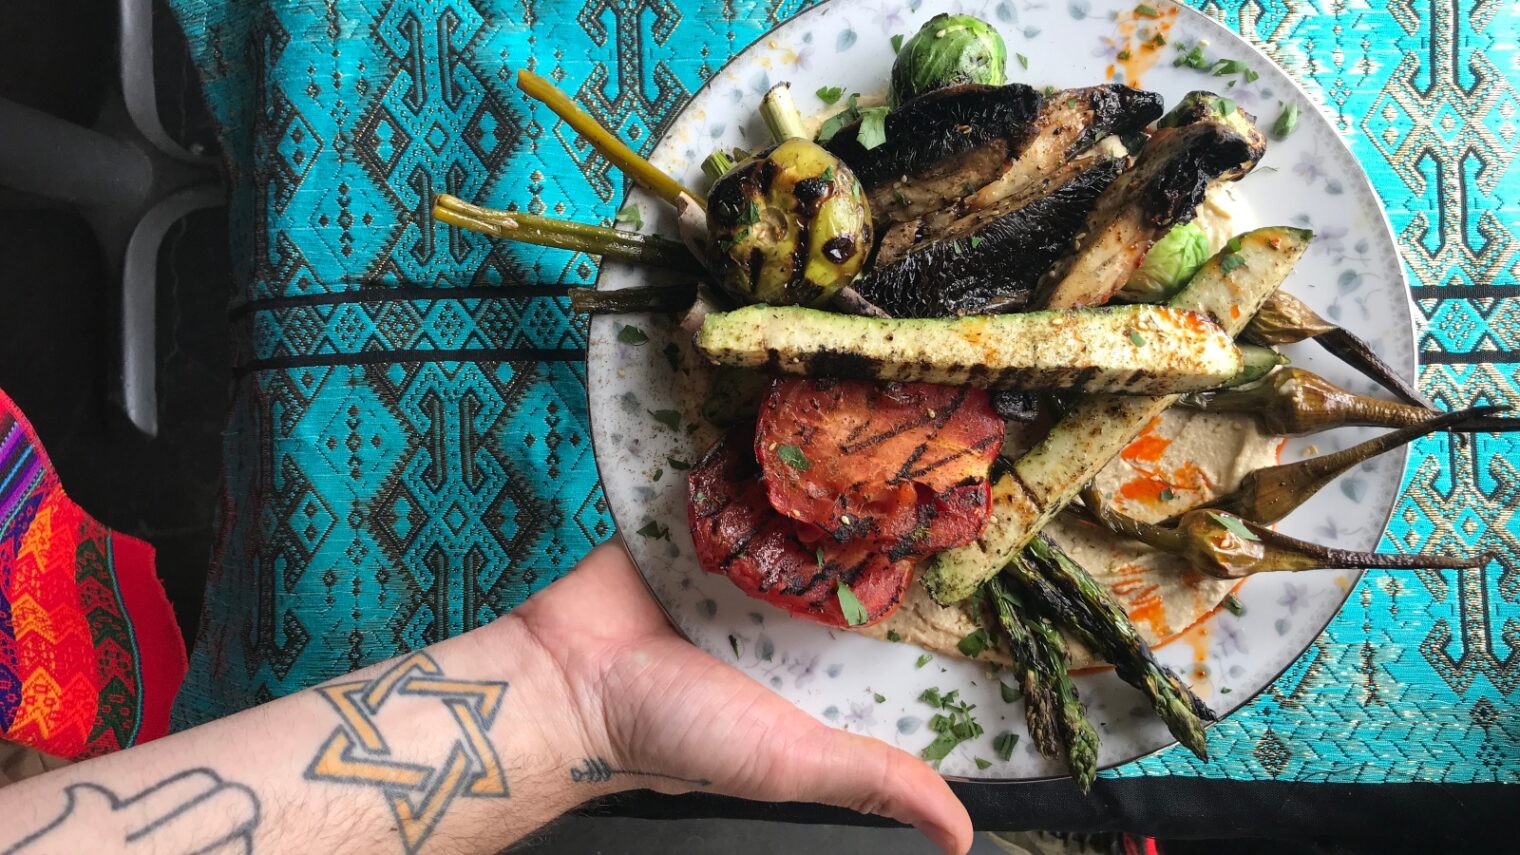 Chef Tal Caspi of Aviv PDX with a plate of hummus topped by grilled veggies. Photo: courtesy